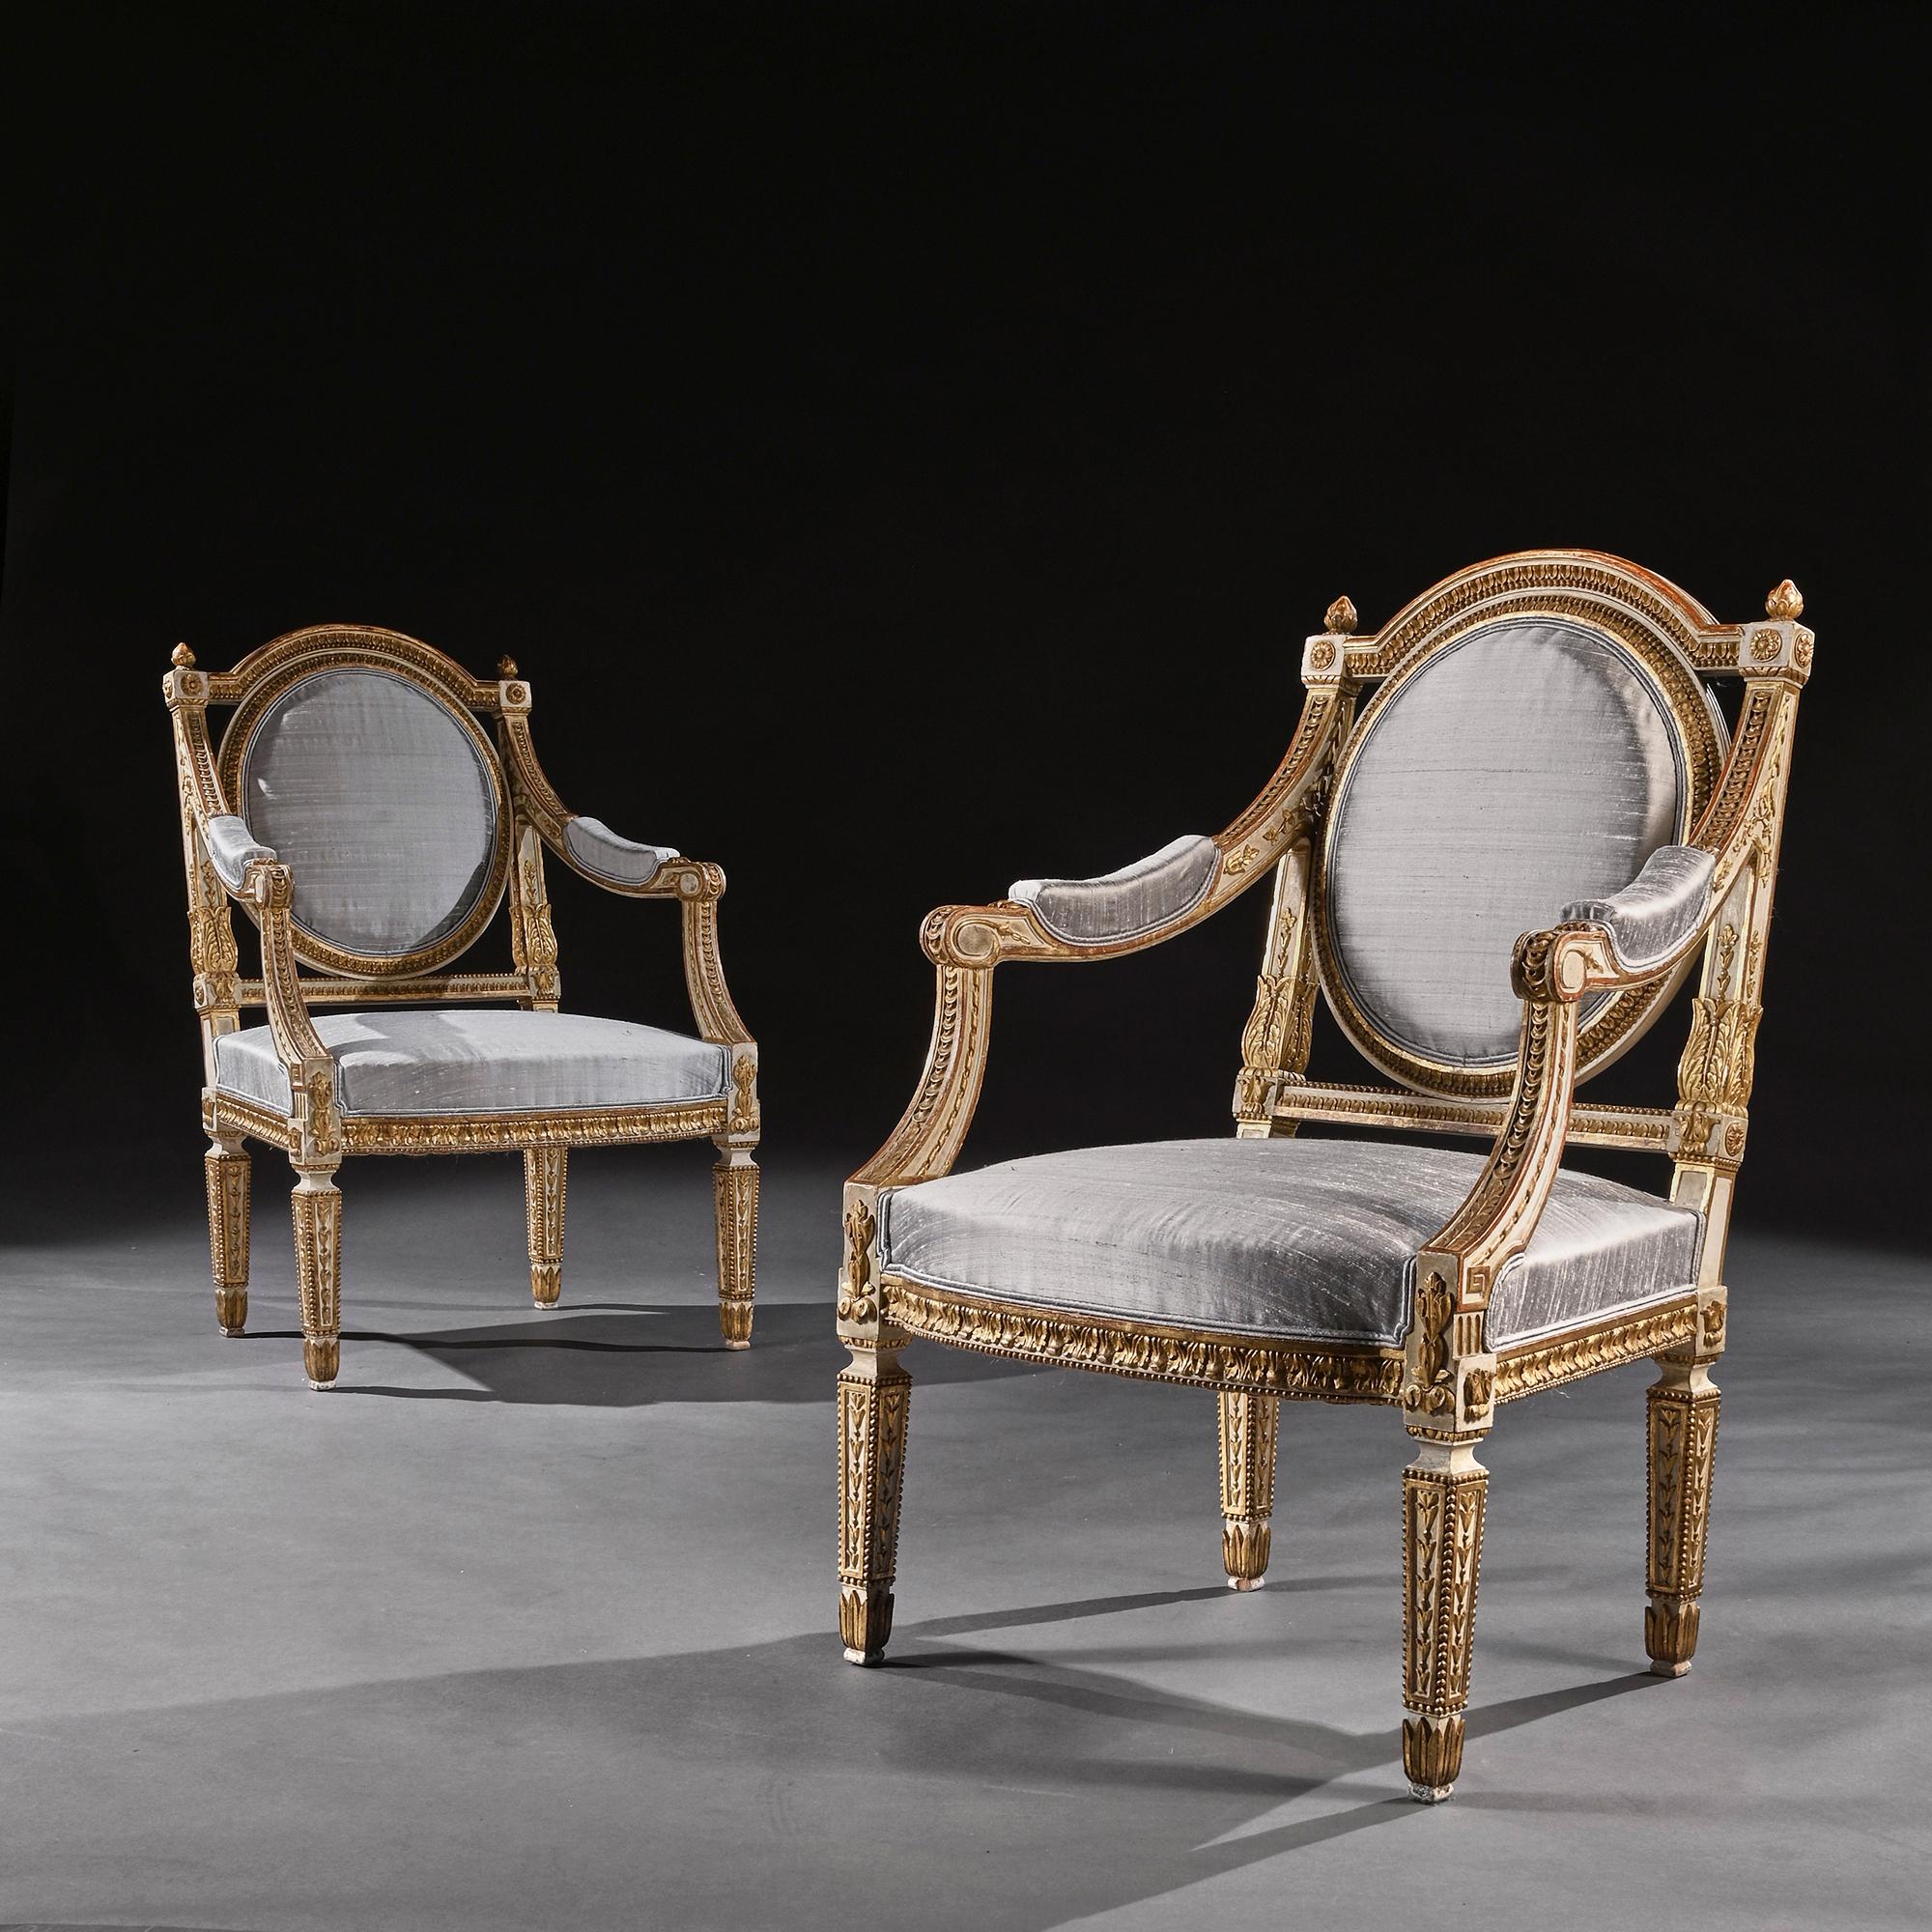 Extremely fine pair of decorative 19th Century Italian painted and parcel gilt armchairs of neo-classical design.

Italian Late 19th C - Circa 1880.

Oozing style these very attractive parcel gilt armchairs have husk and foliate-carved